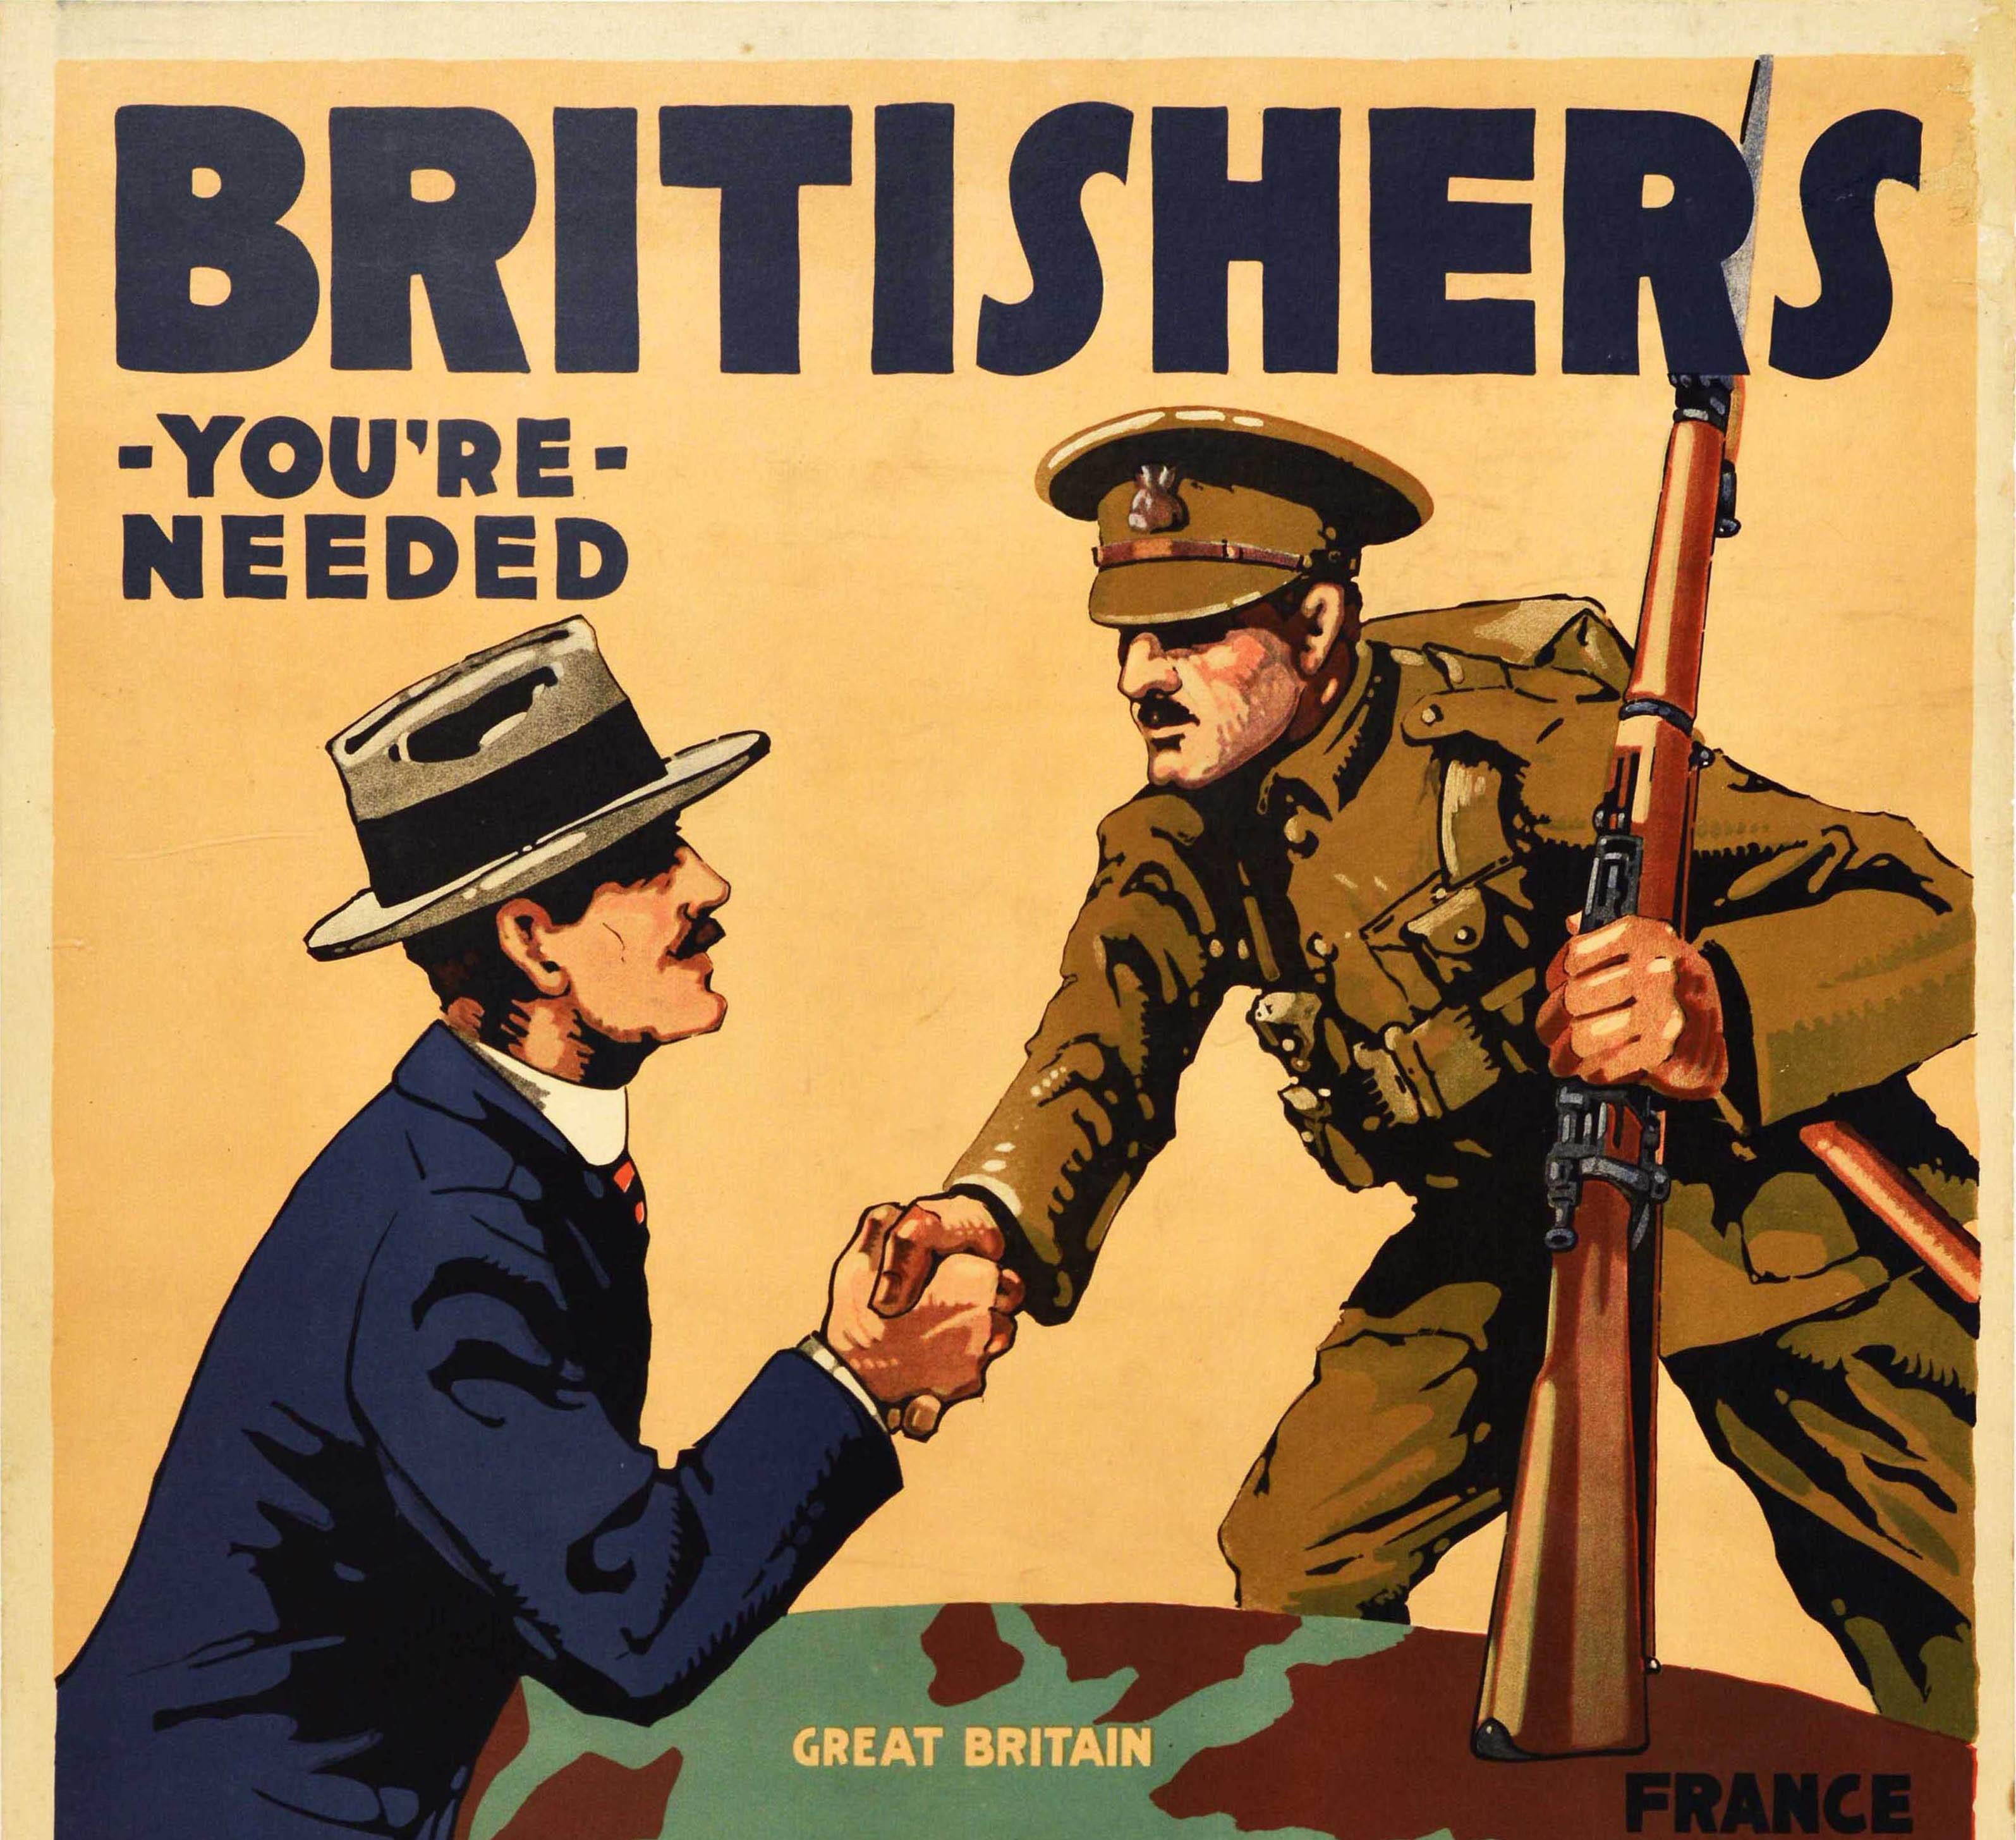 Original Antique WWI Recruitment Poster Britishers You're Needed Come Across Now - Print by Lloyd Myers